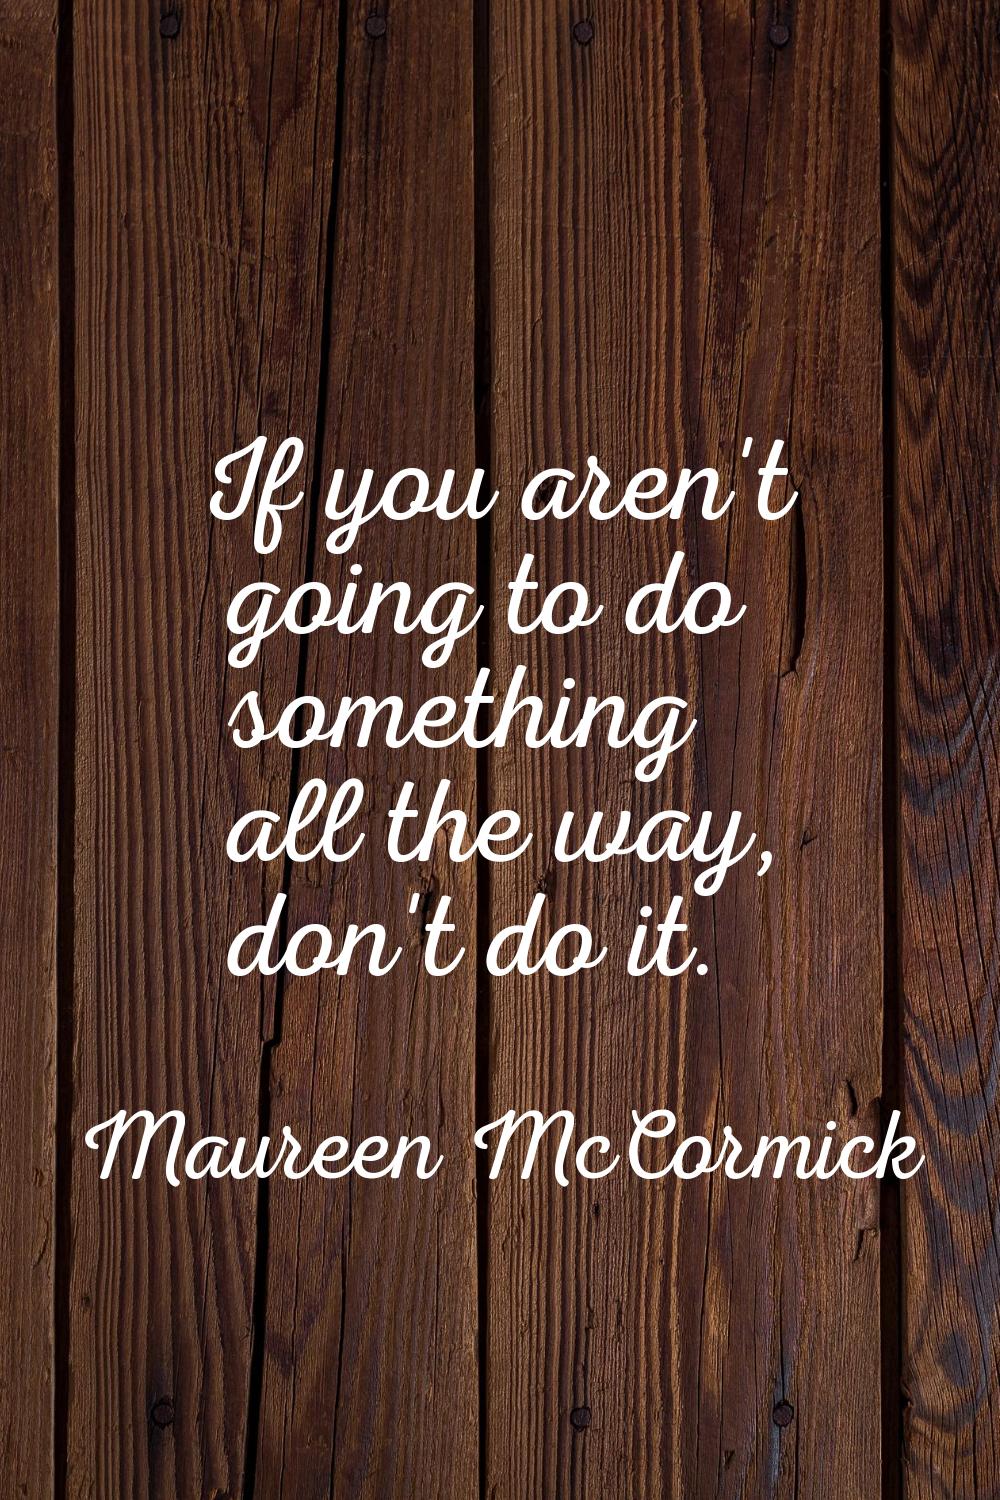 If you aren't going to do something all the way, don't do it.